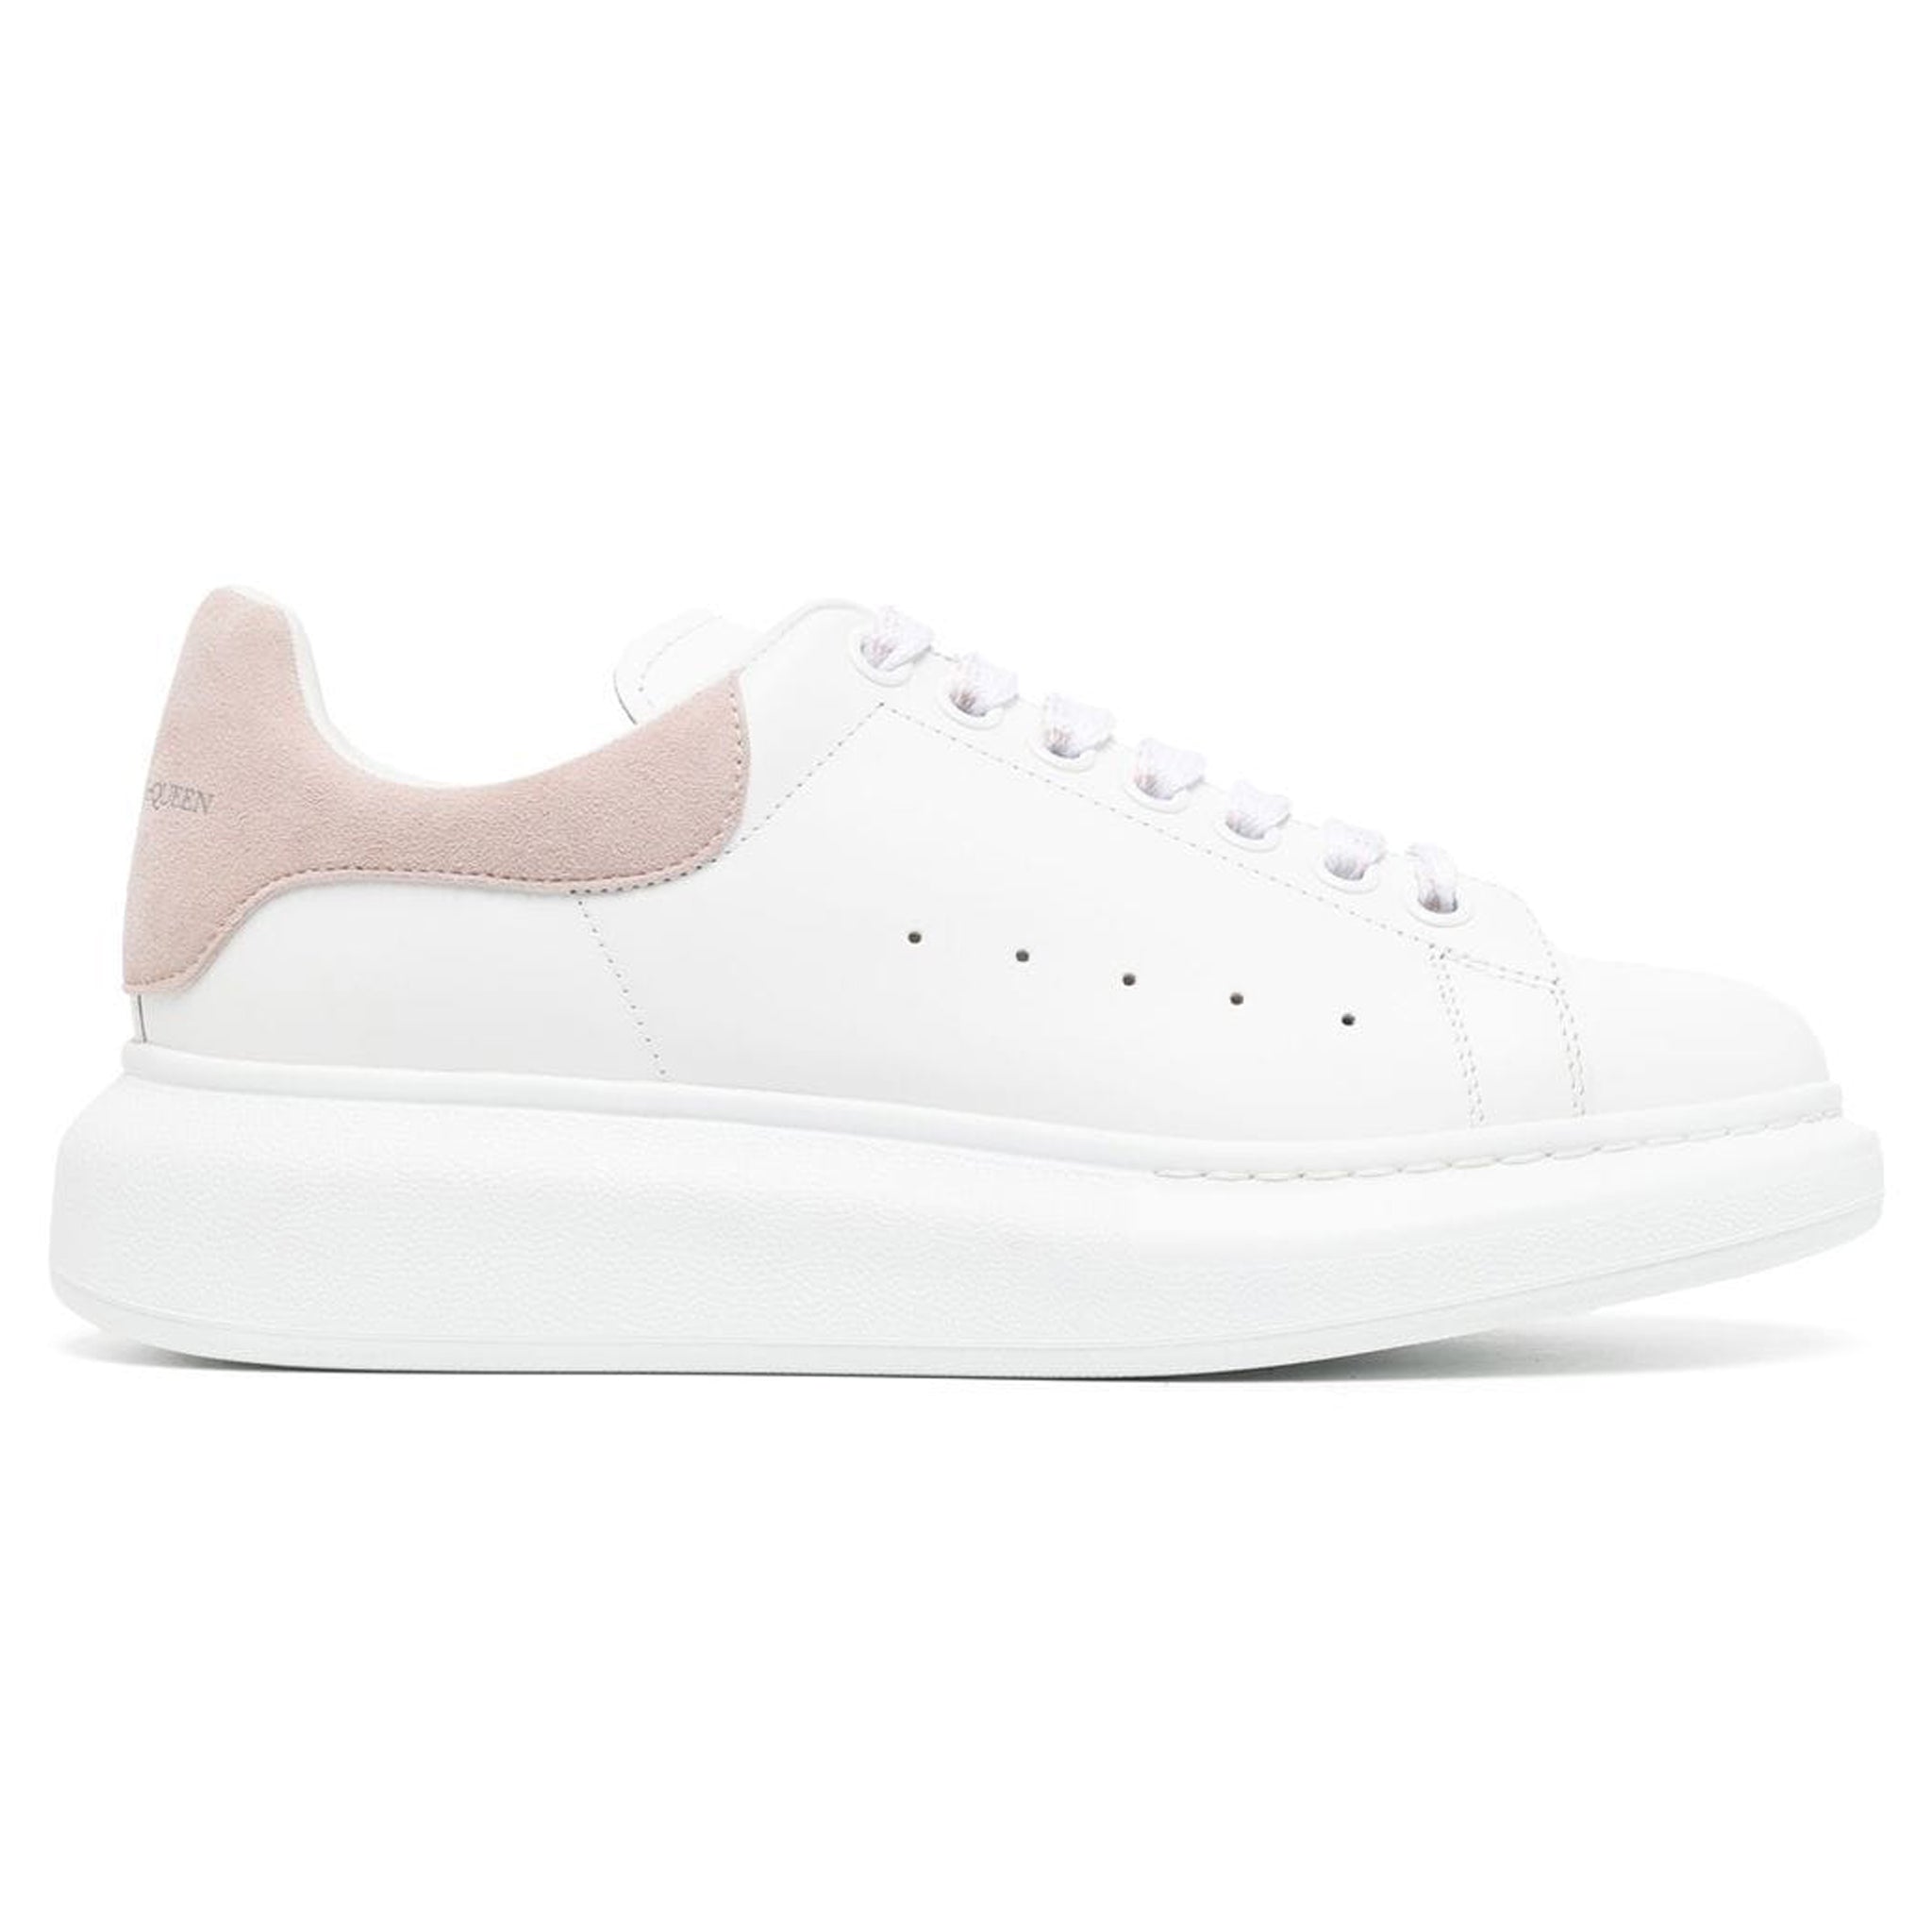 Side view of Alexander Mcqueen Raised Sole White Pink Sneaker